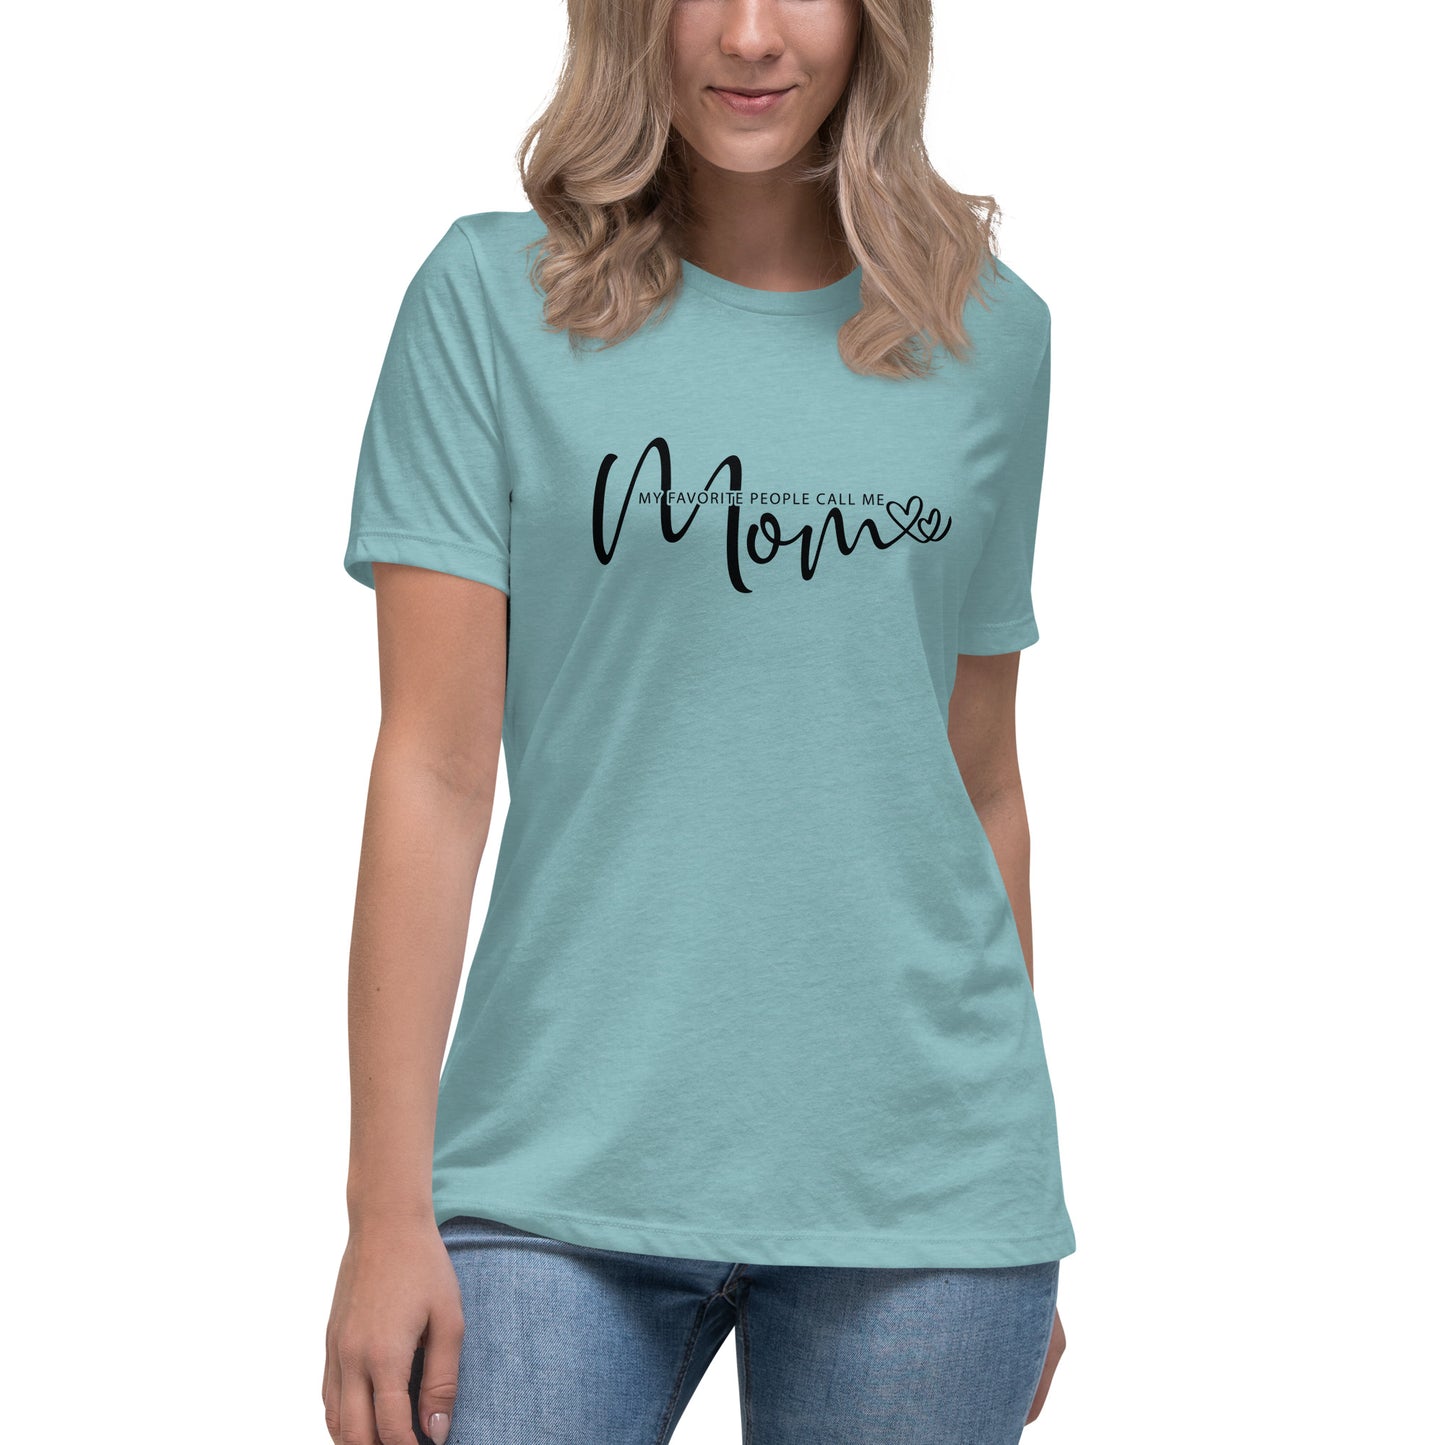 My Favorite People Call me Mom / Women's Relaxed T-Shirt